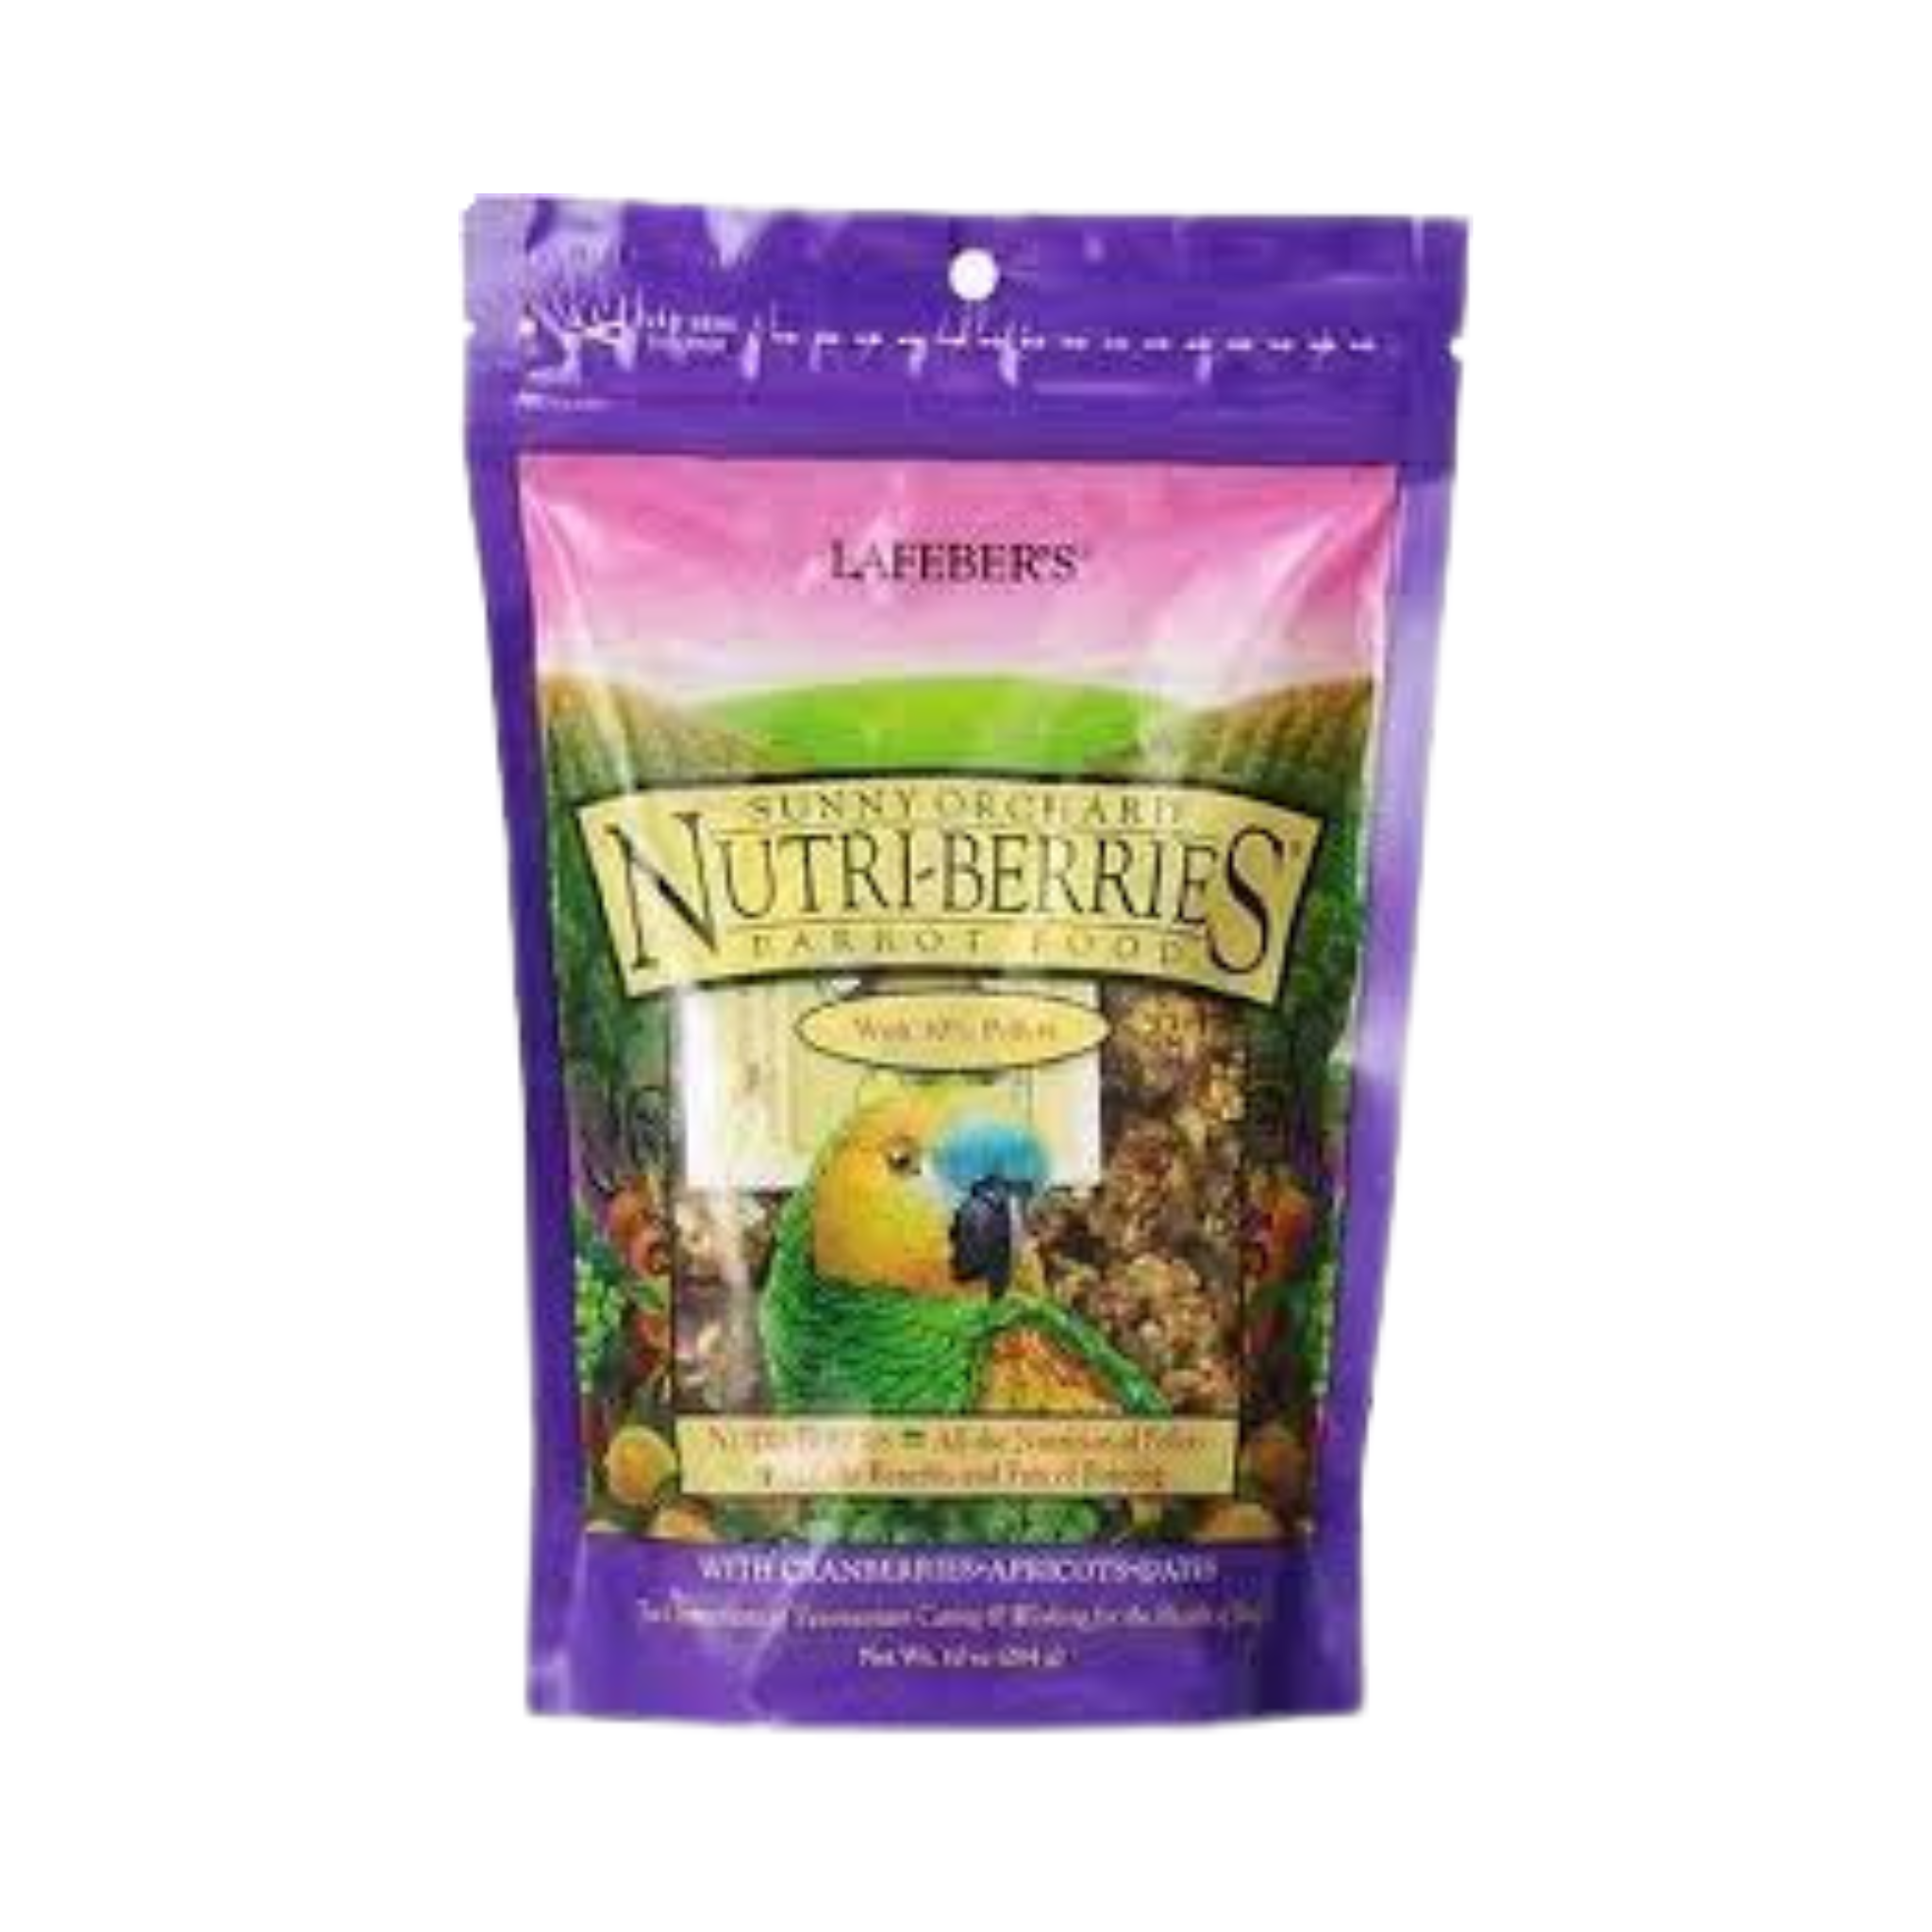 Nutri-Berries Sunny Orchard Parrot Food With Cranberries Apricots & Dates